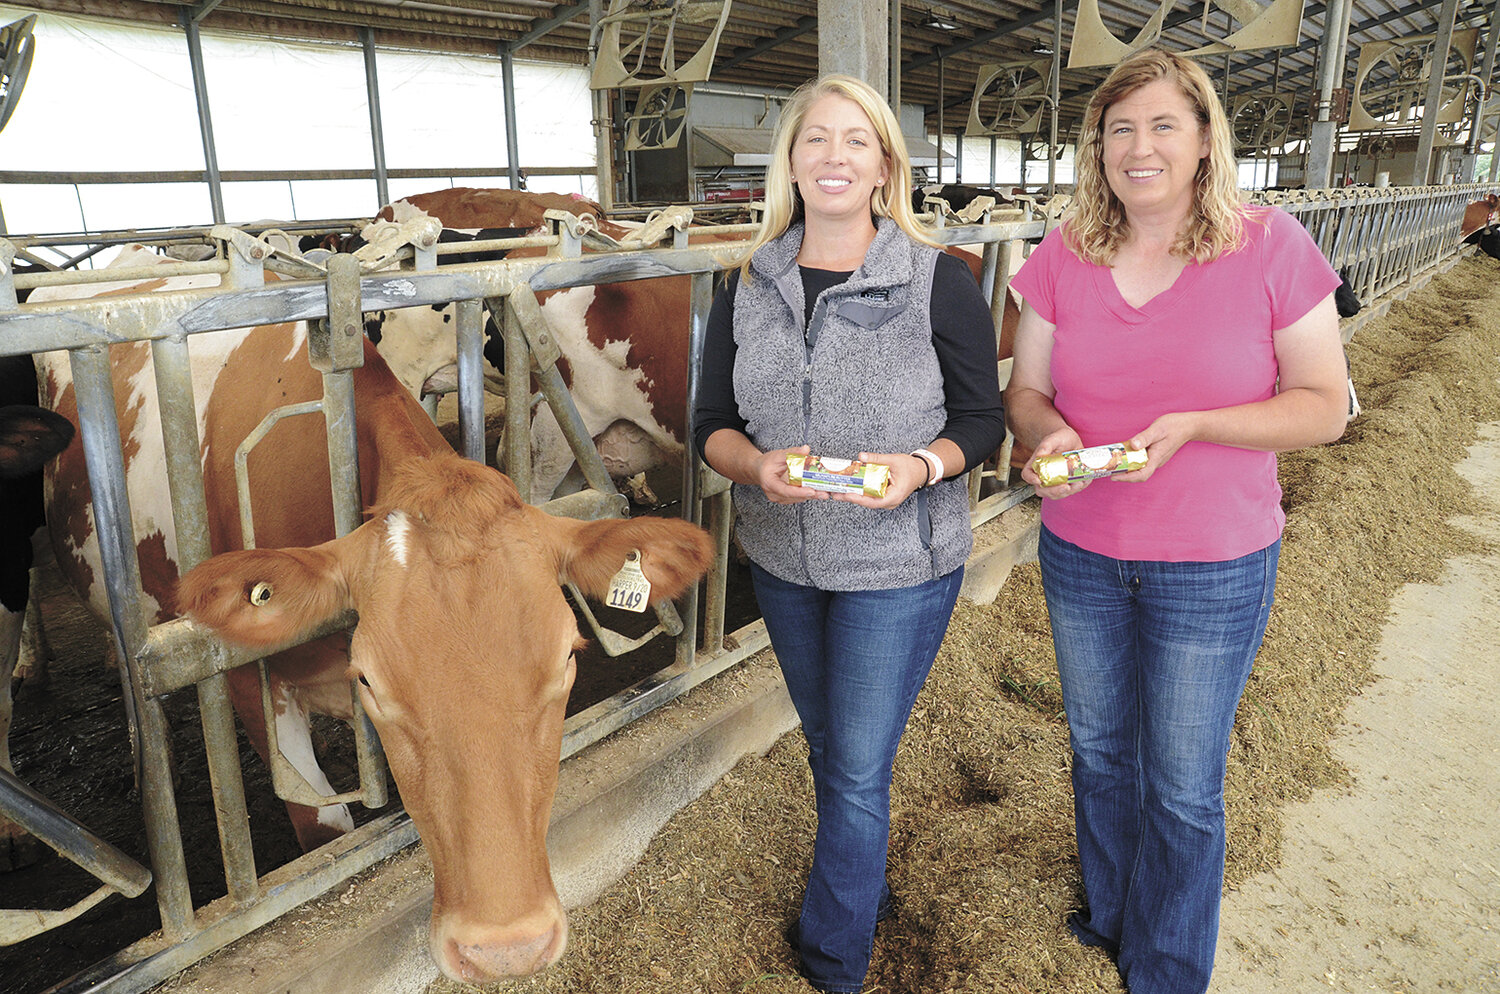 Jen (left) and Julie Orchard pose next to a favorite Guernsey Sept. 7 with butter made from their farm’s milk near Columbus, Wisconsin. Julie and her husband, Ed Bacon, milk 120 cows and farm 800 acres.